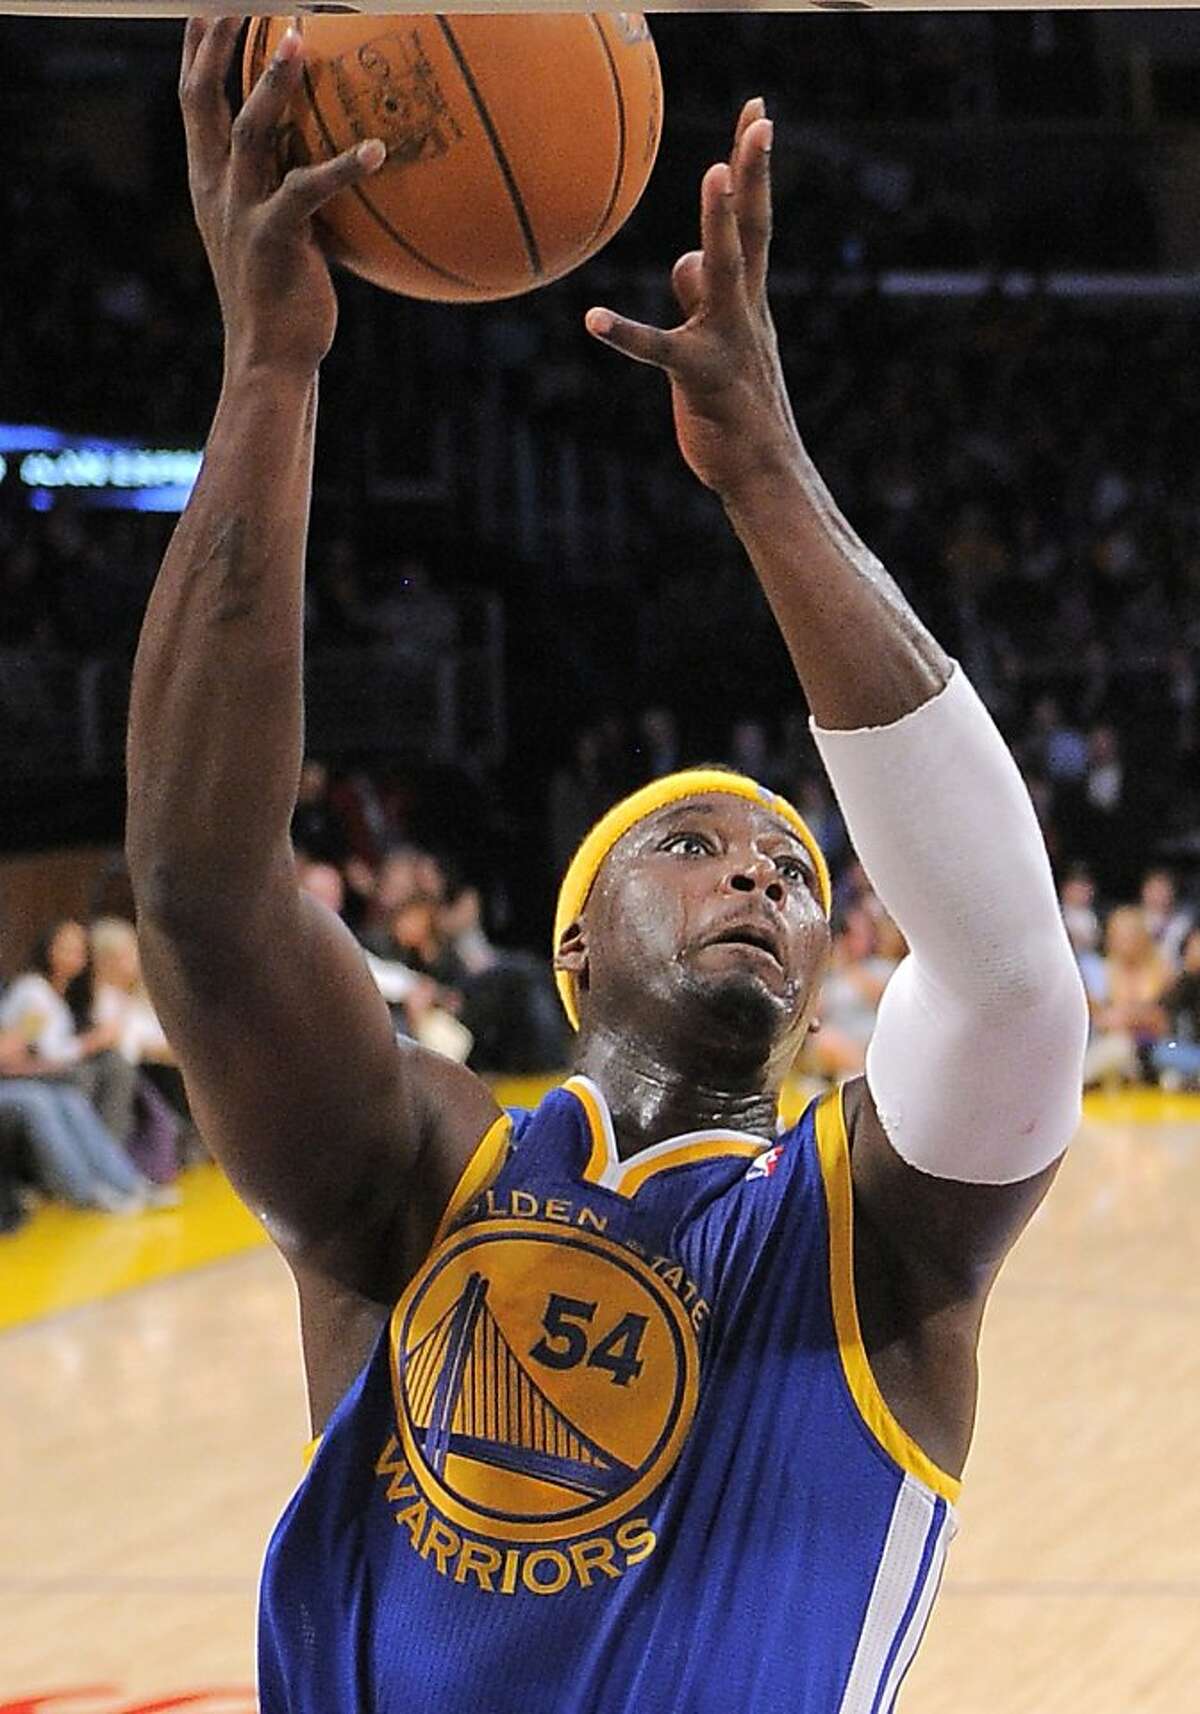 Golden State Warriors center Kwame Brown puts up a shot during the first half of their NBA basketball game against the Los Angeles Lakers, Friday, Jan. 6, 2012, in Los Angeles.